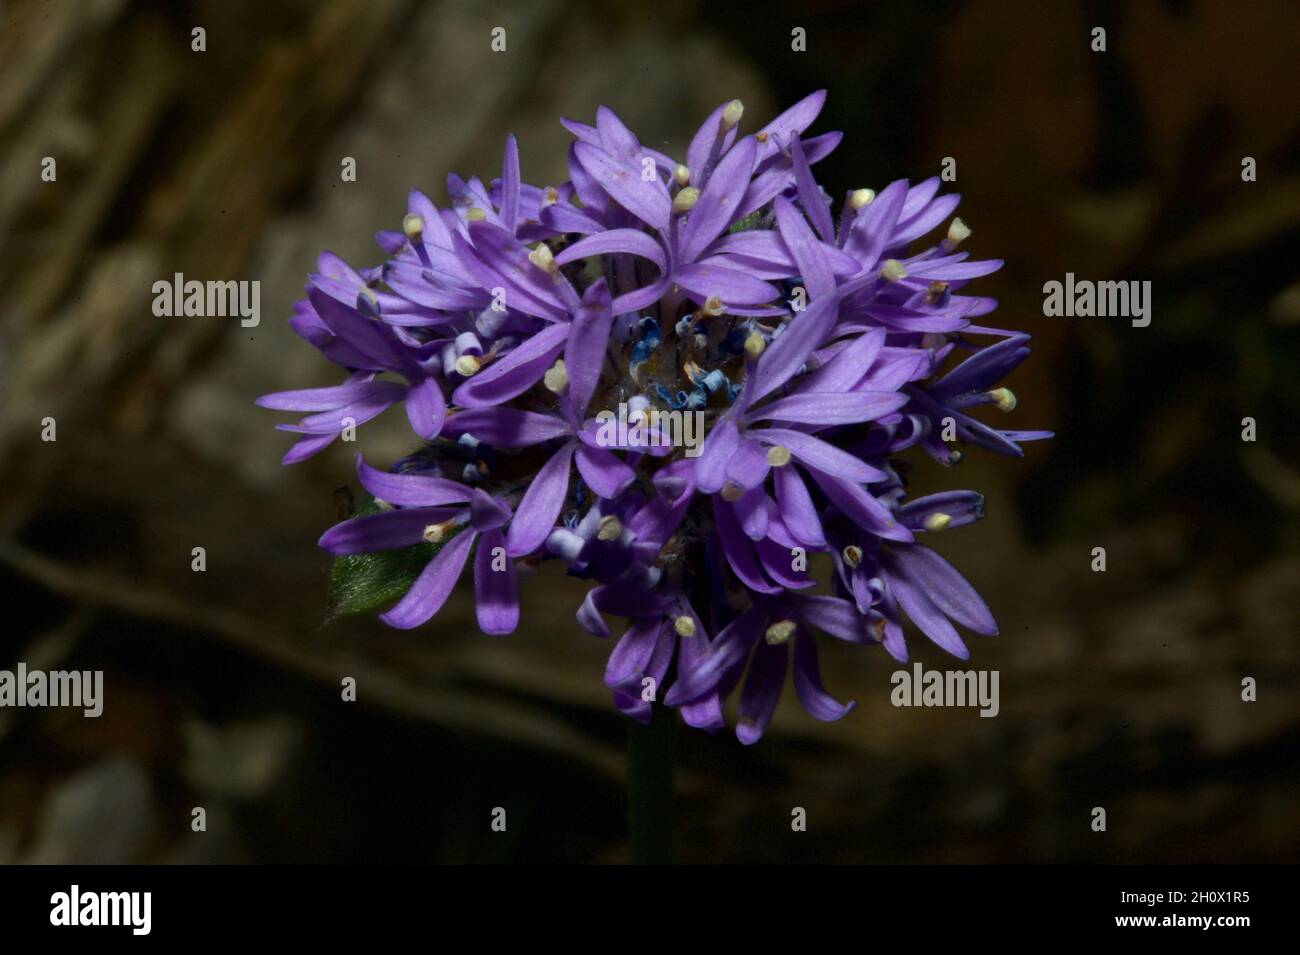 Blue Pincushion flowers (Brunonia Australis) are a common sight in Summer in the woodlands of Southern Australia, and light up the forest floor. Stock Photo